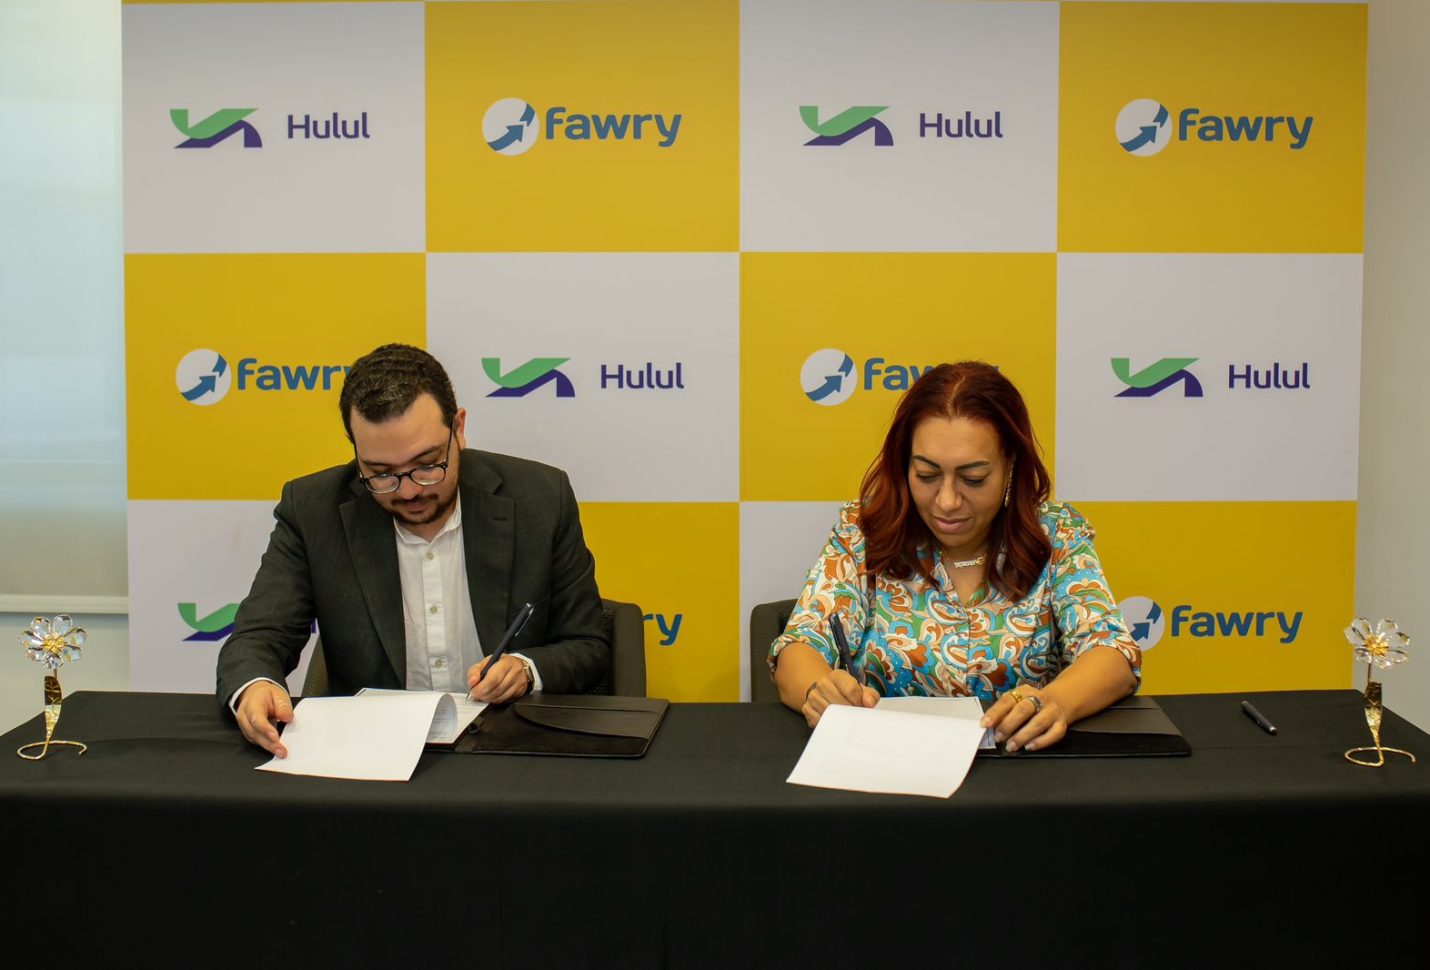 A strategic partnership between Fawry and Hulul to enhance the digital growth of small and medium-sized enterprises